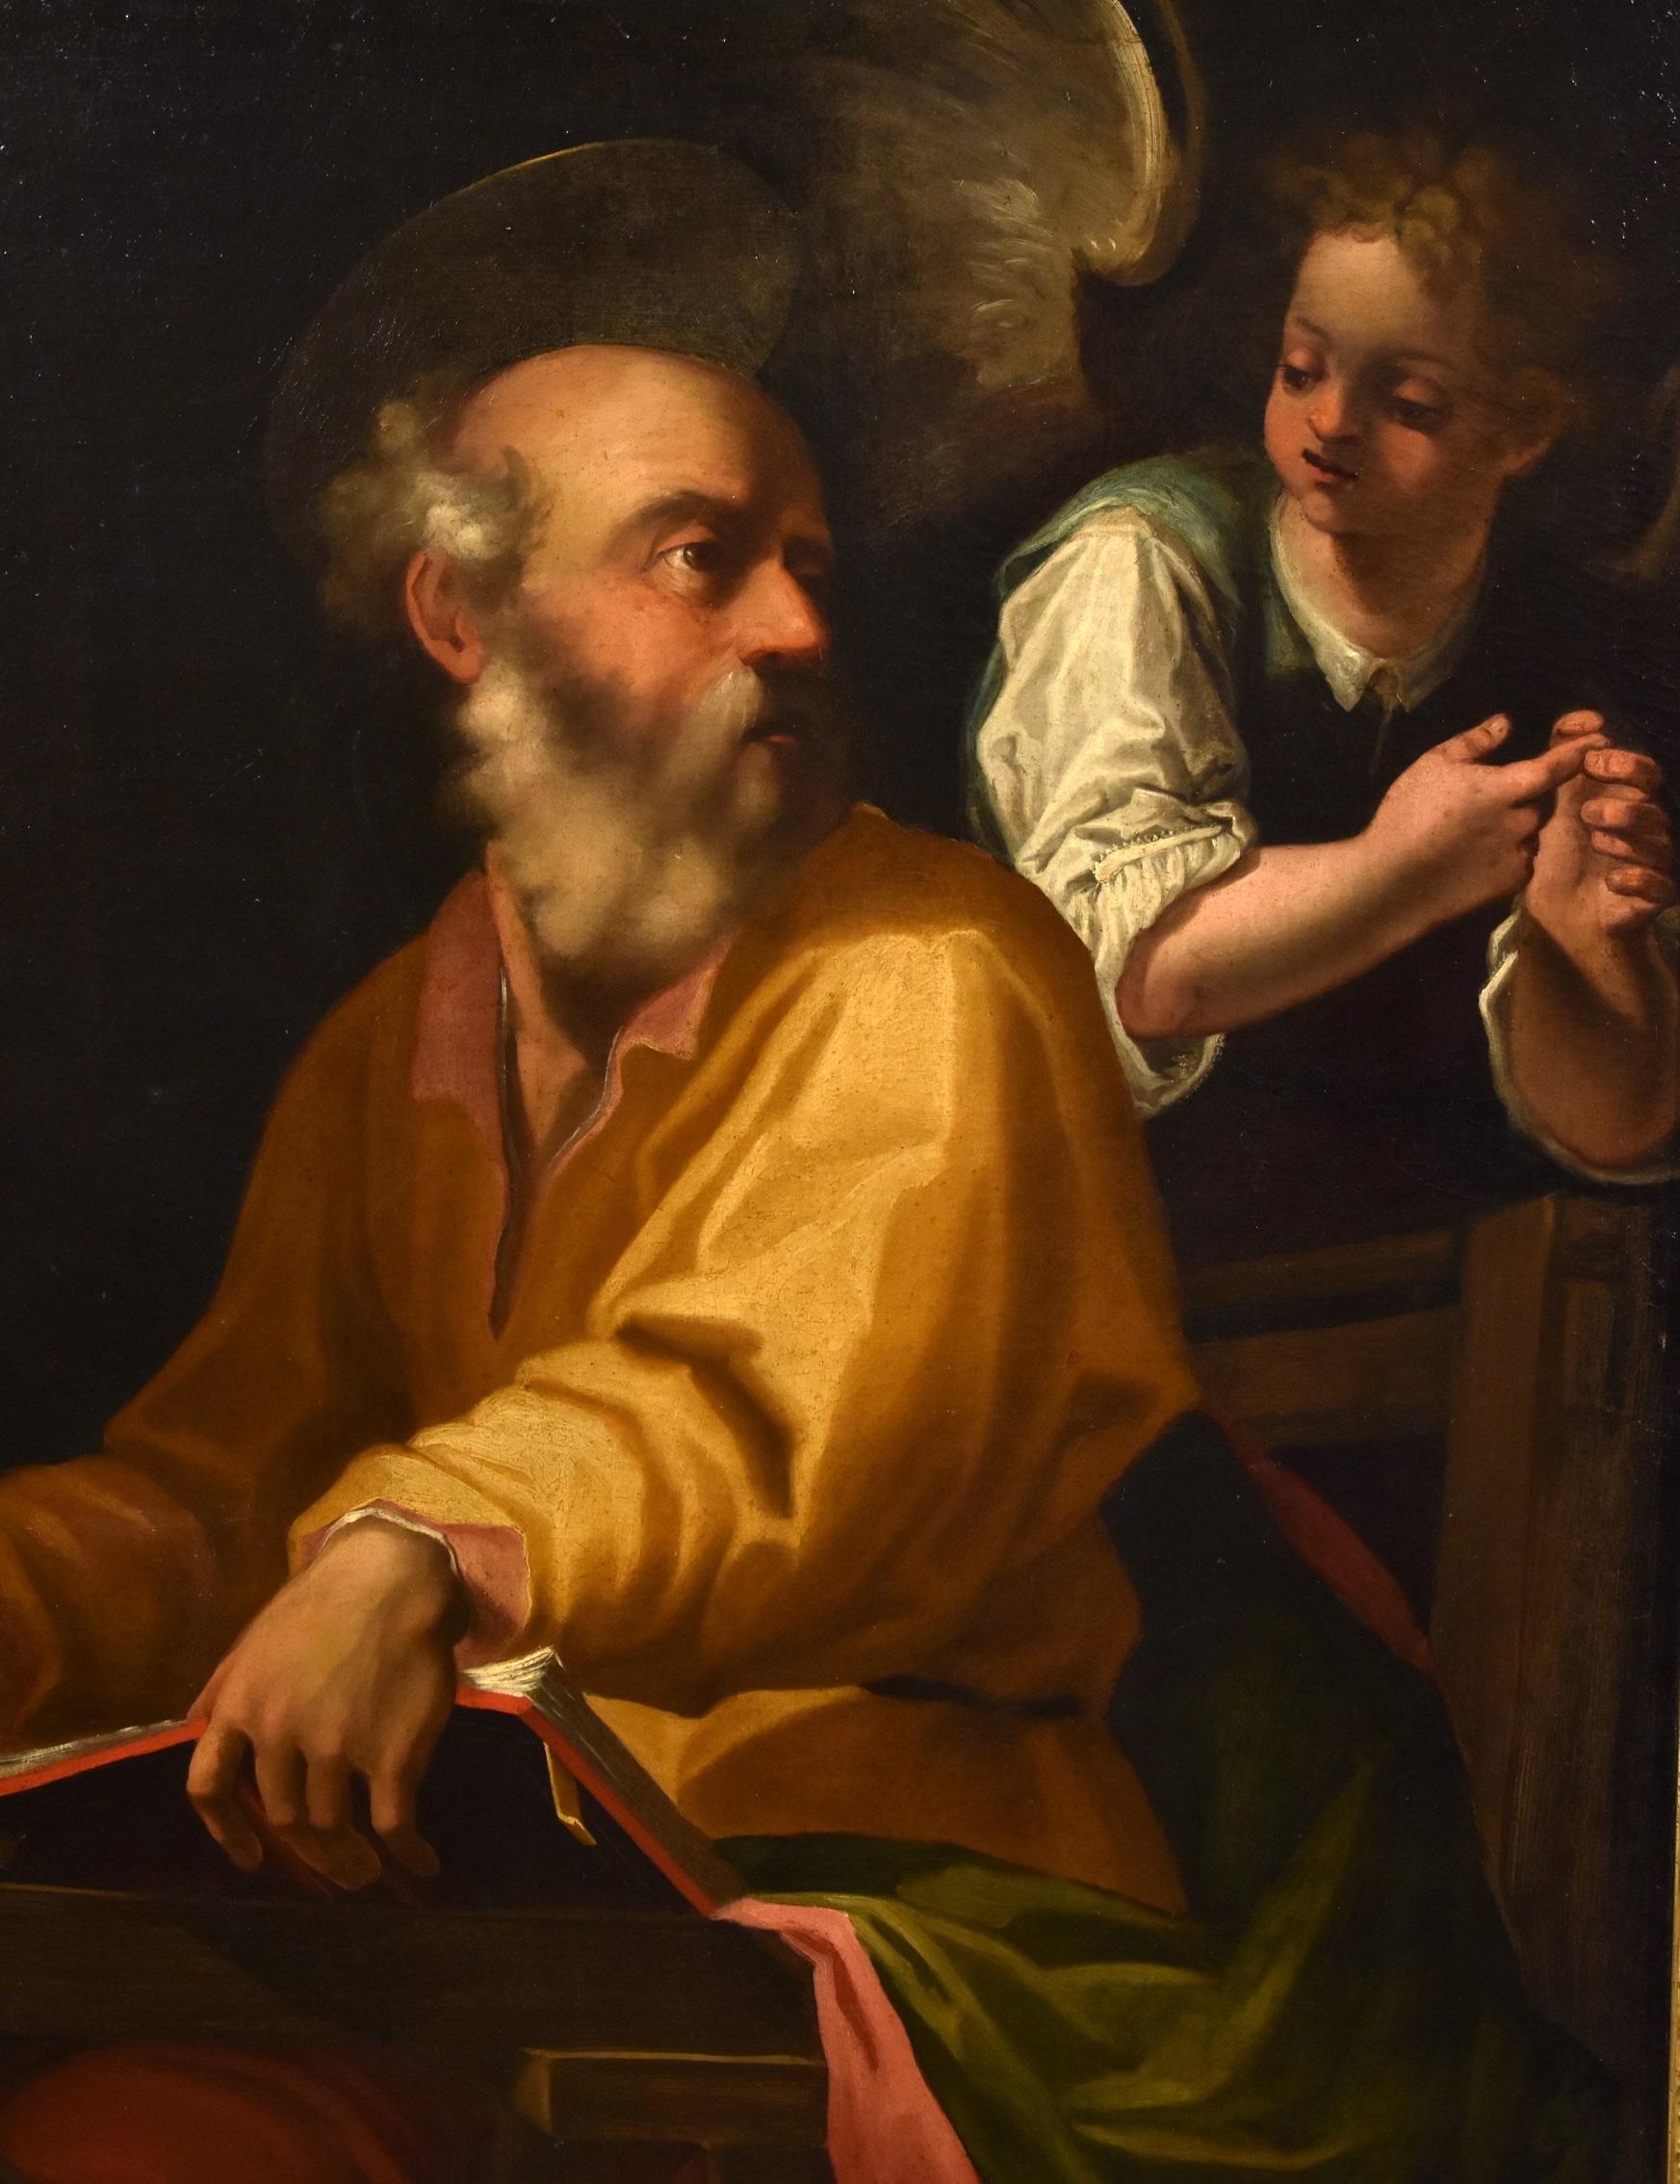 Saint Matthew Angel Procaccini Paint Oil on canvas Old master 17th Century Art - Old Masters Painting by Camillo Procaccini (Bologna 1561 - 1629 Milan)